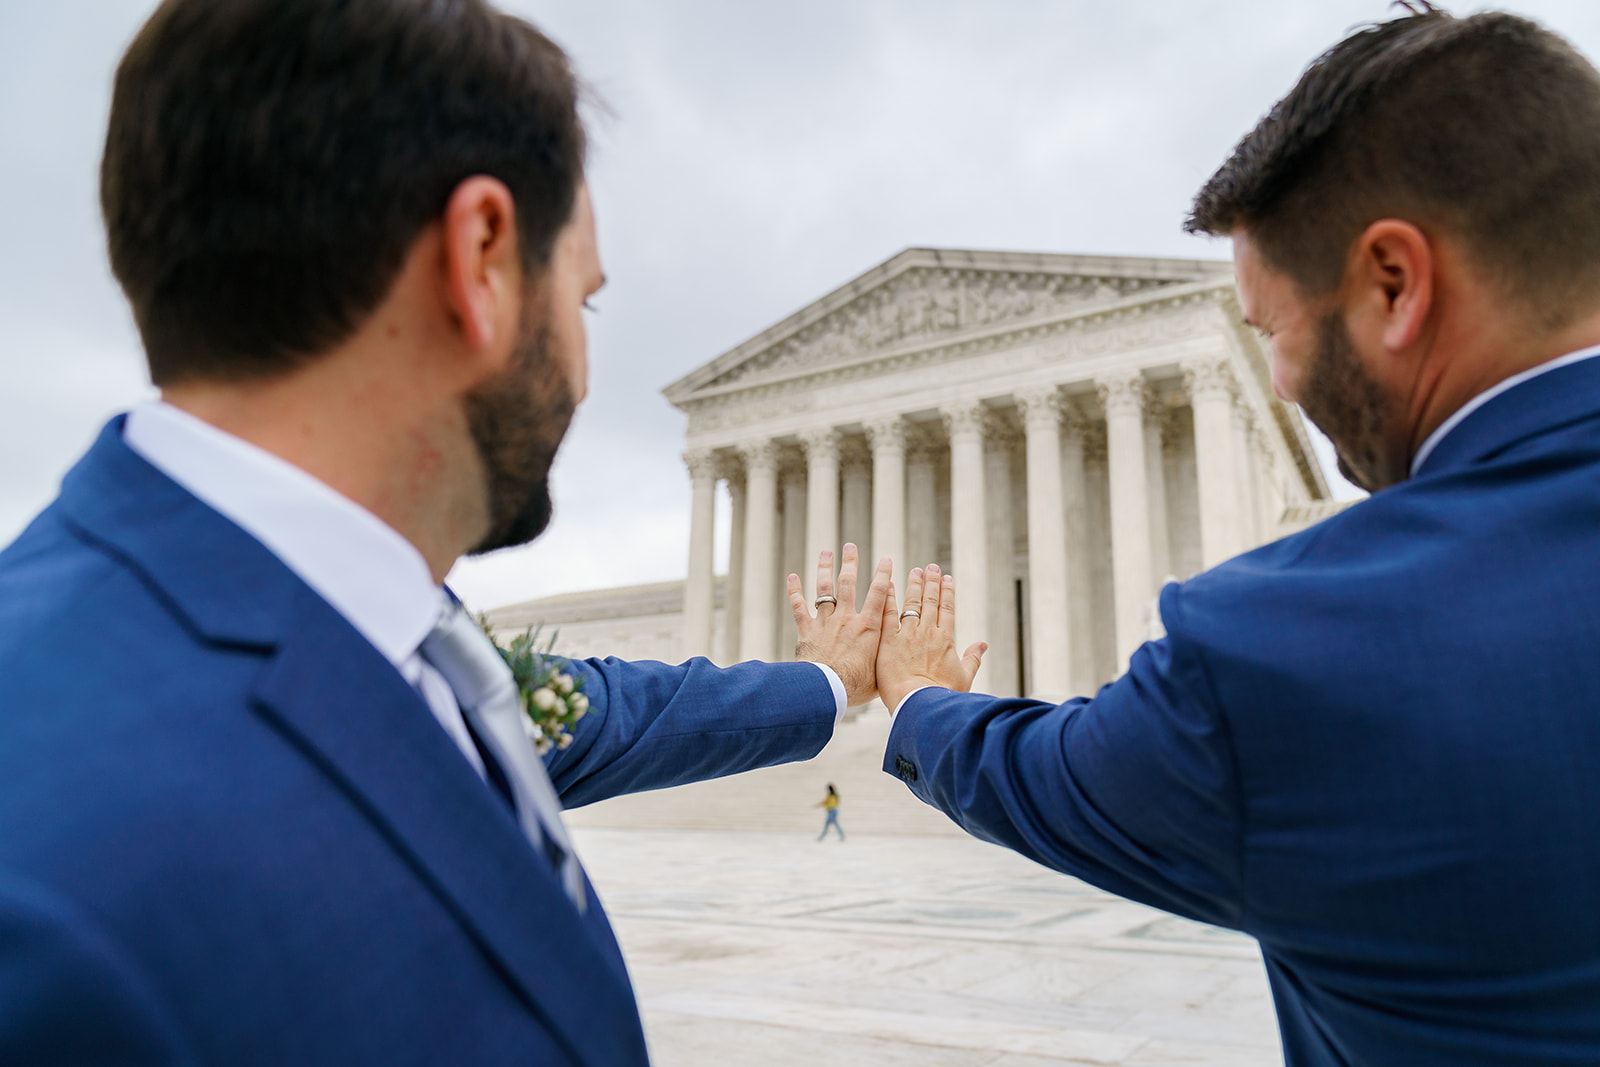 Same-sex couple show wedding rings in front of Supreme Court